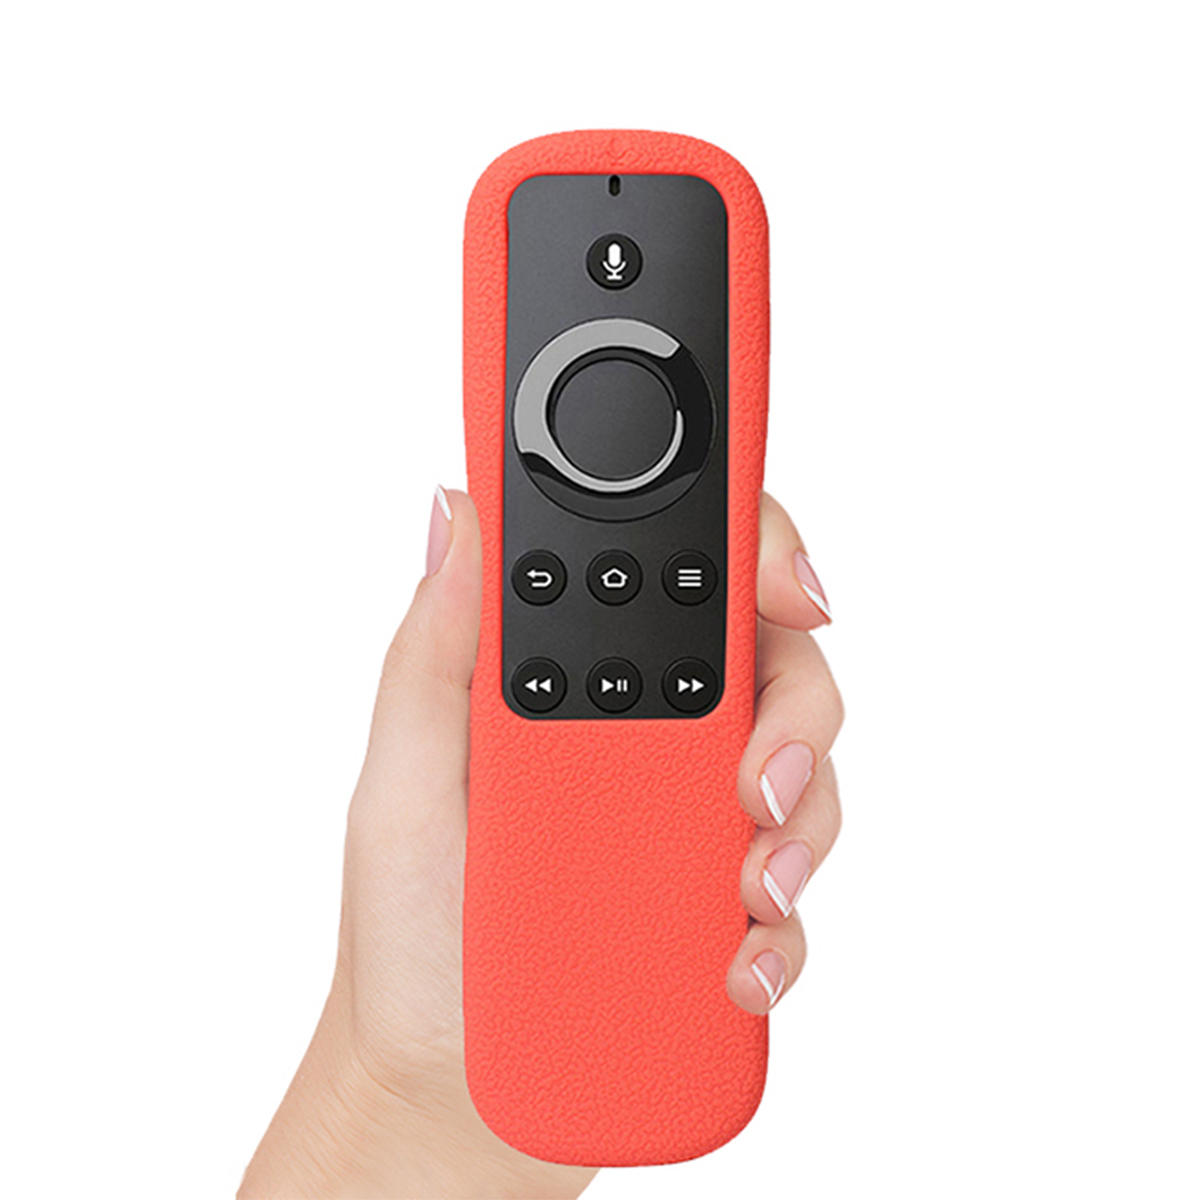 Red TV Remote Control Cover Skin For Amazon Alexa Voice Fire TV Remote Newest Second Generation